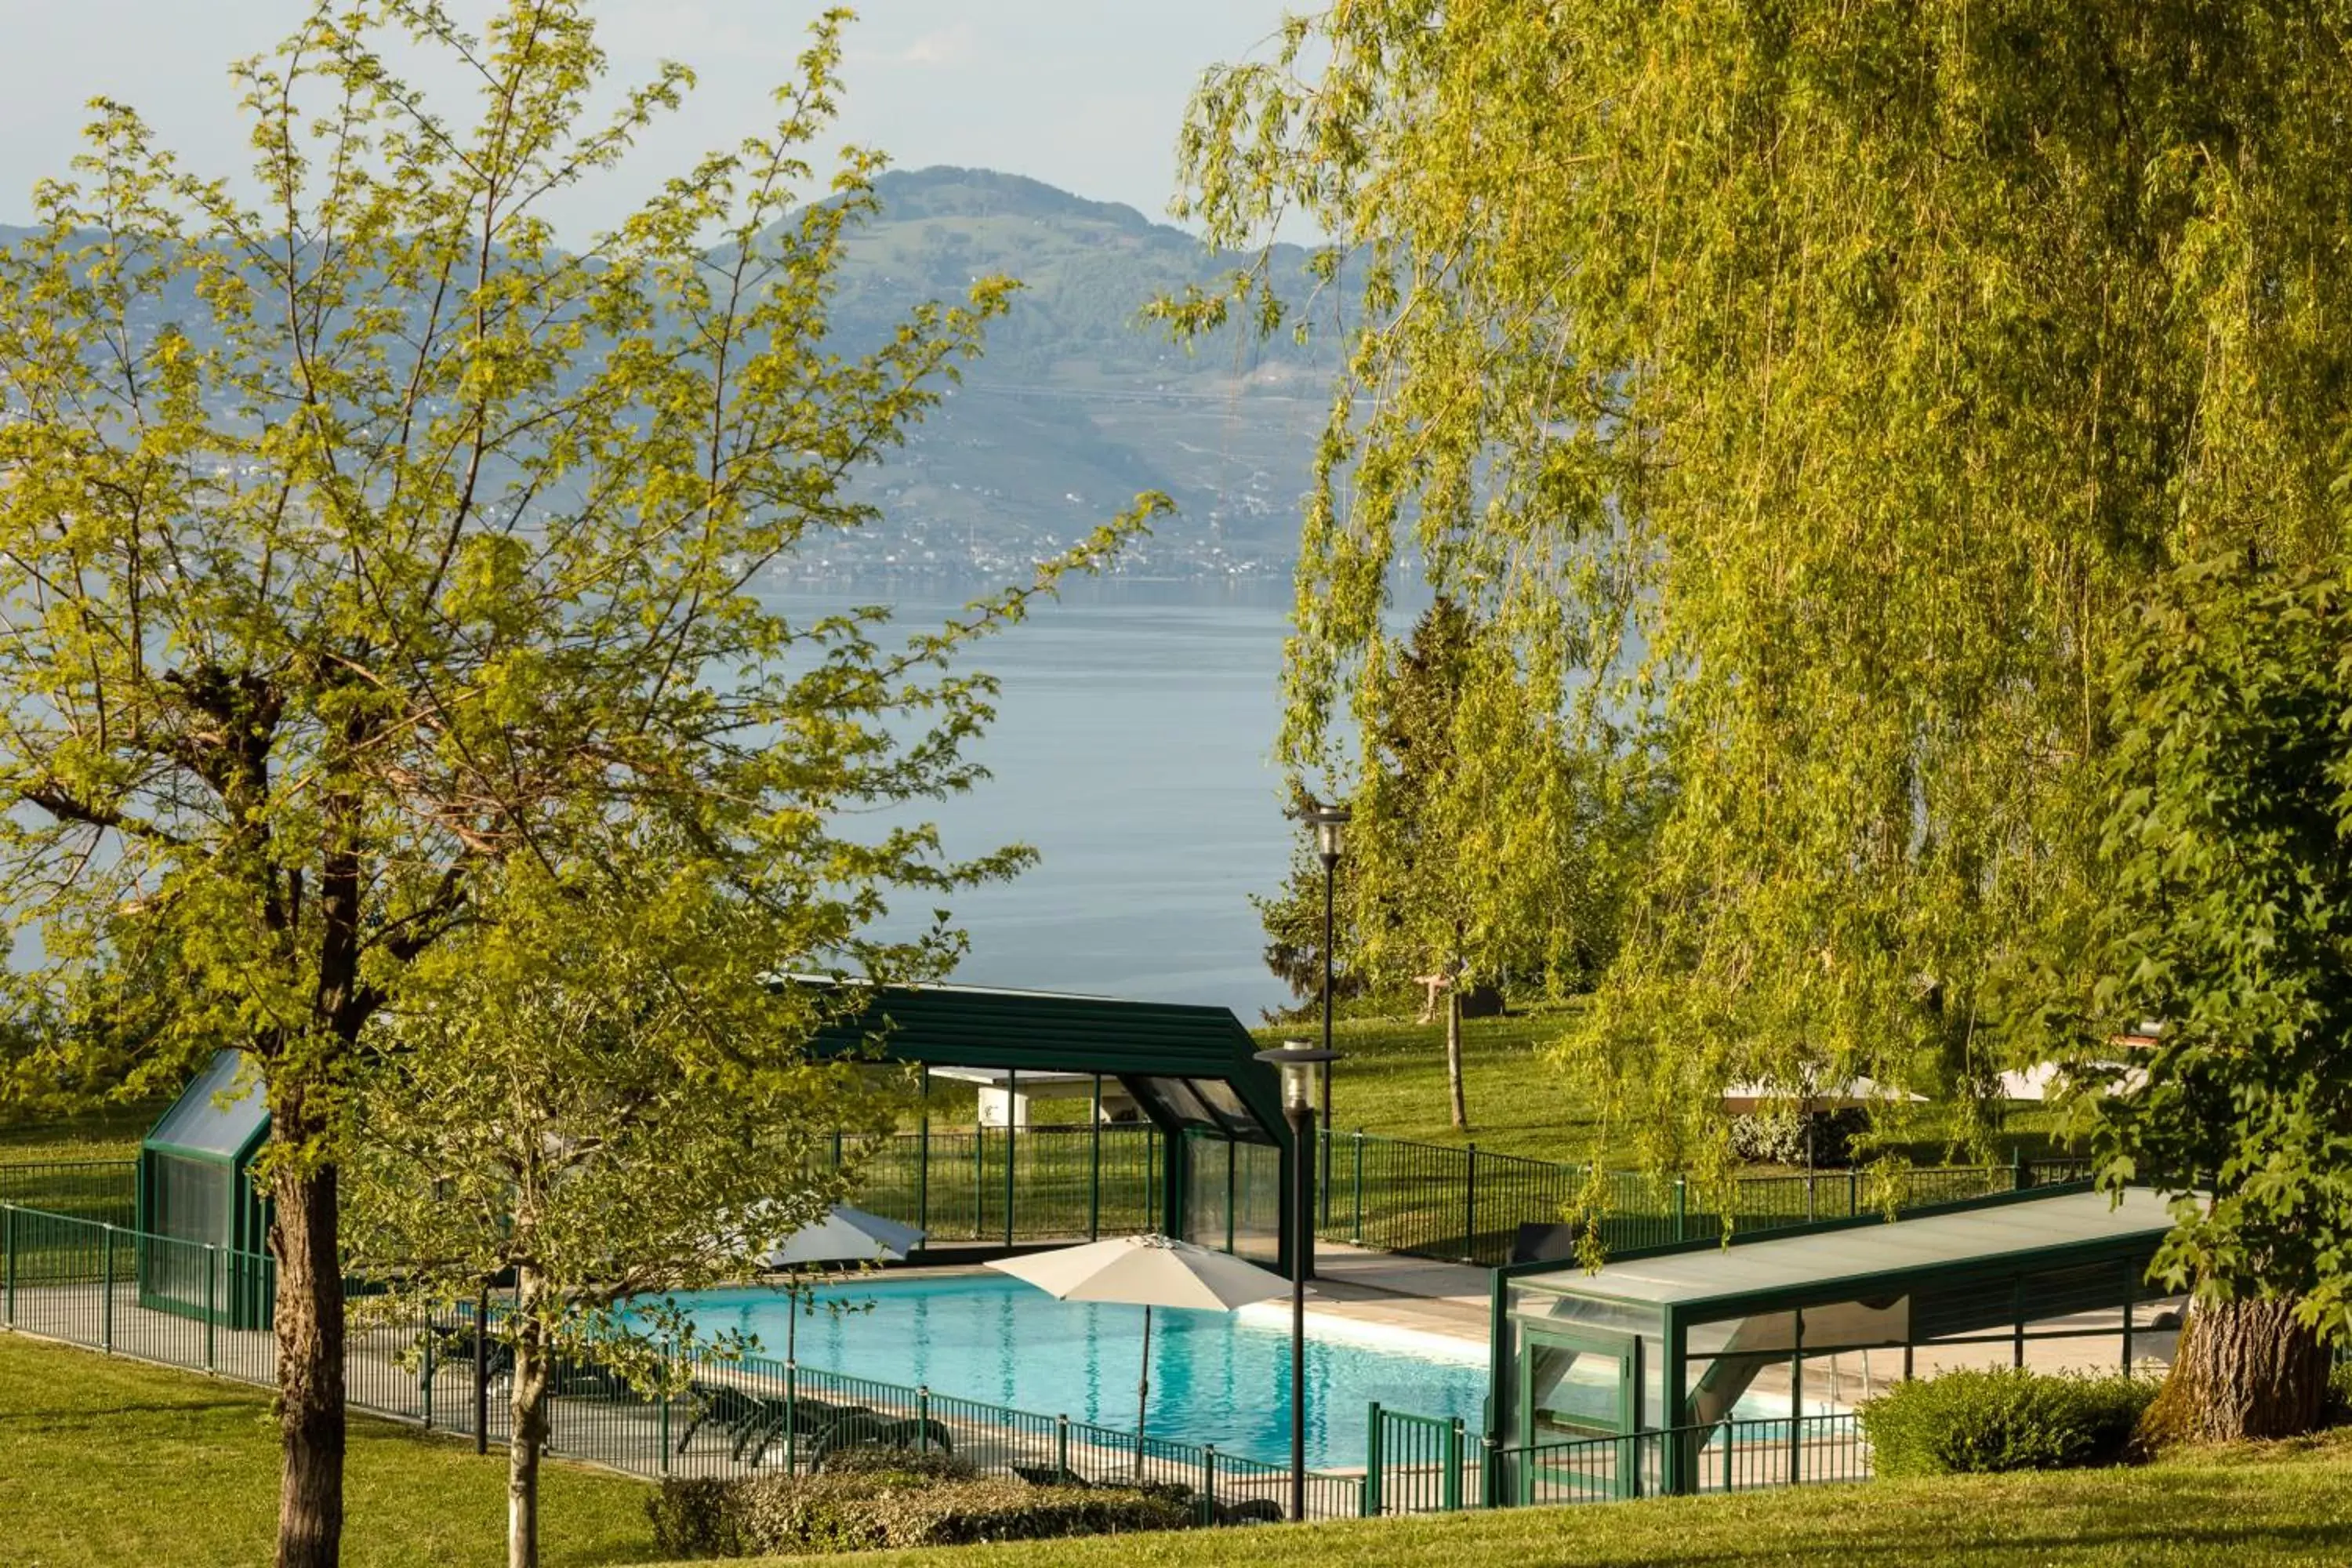 Swimming pool in Garden & City Evian - Lugrin